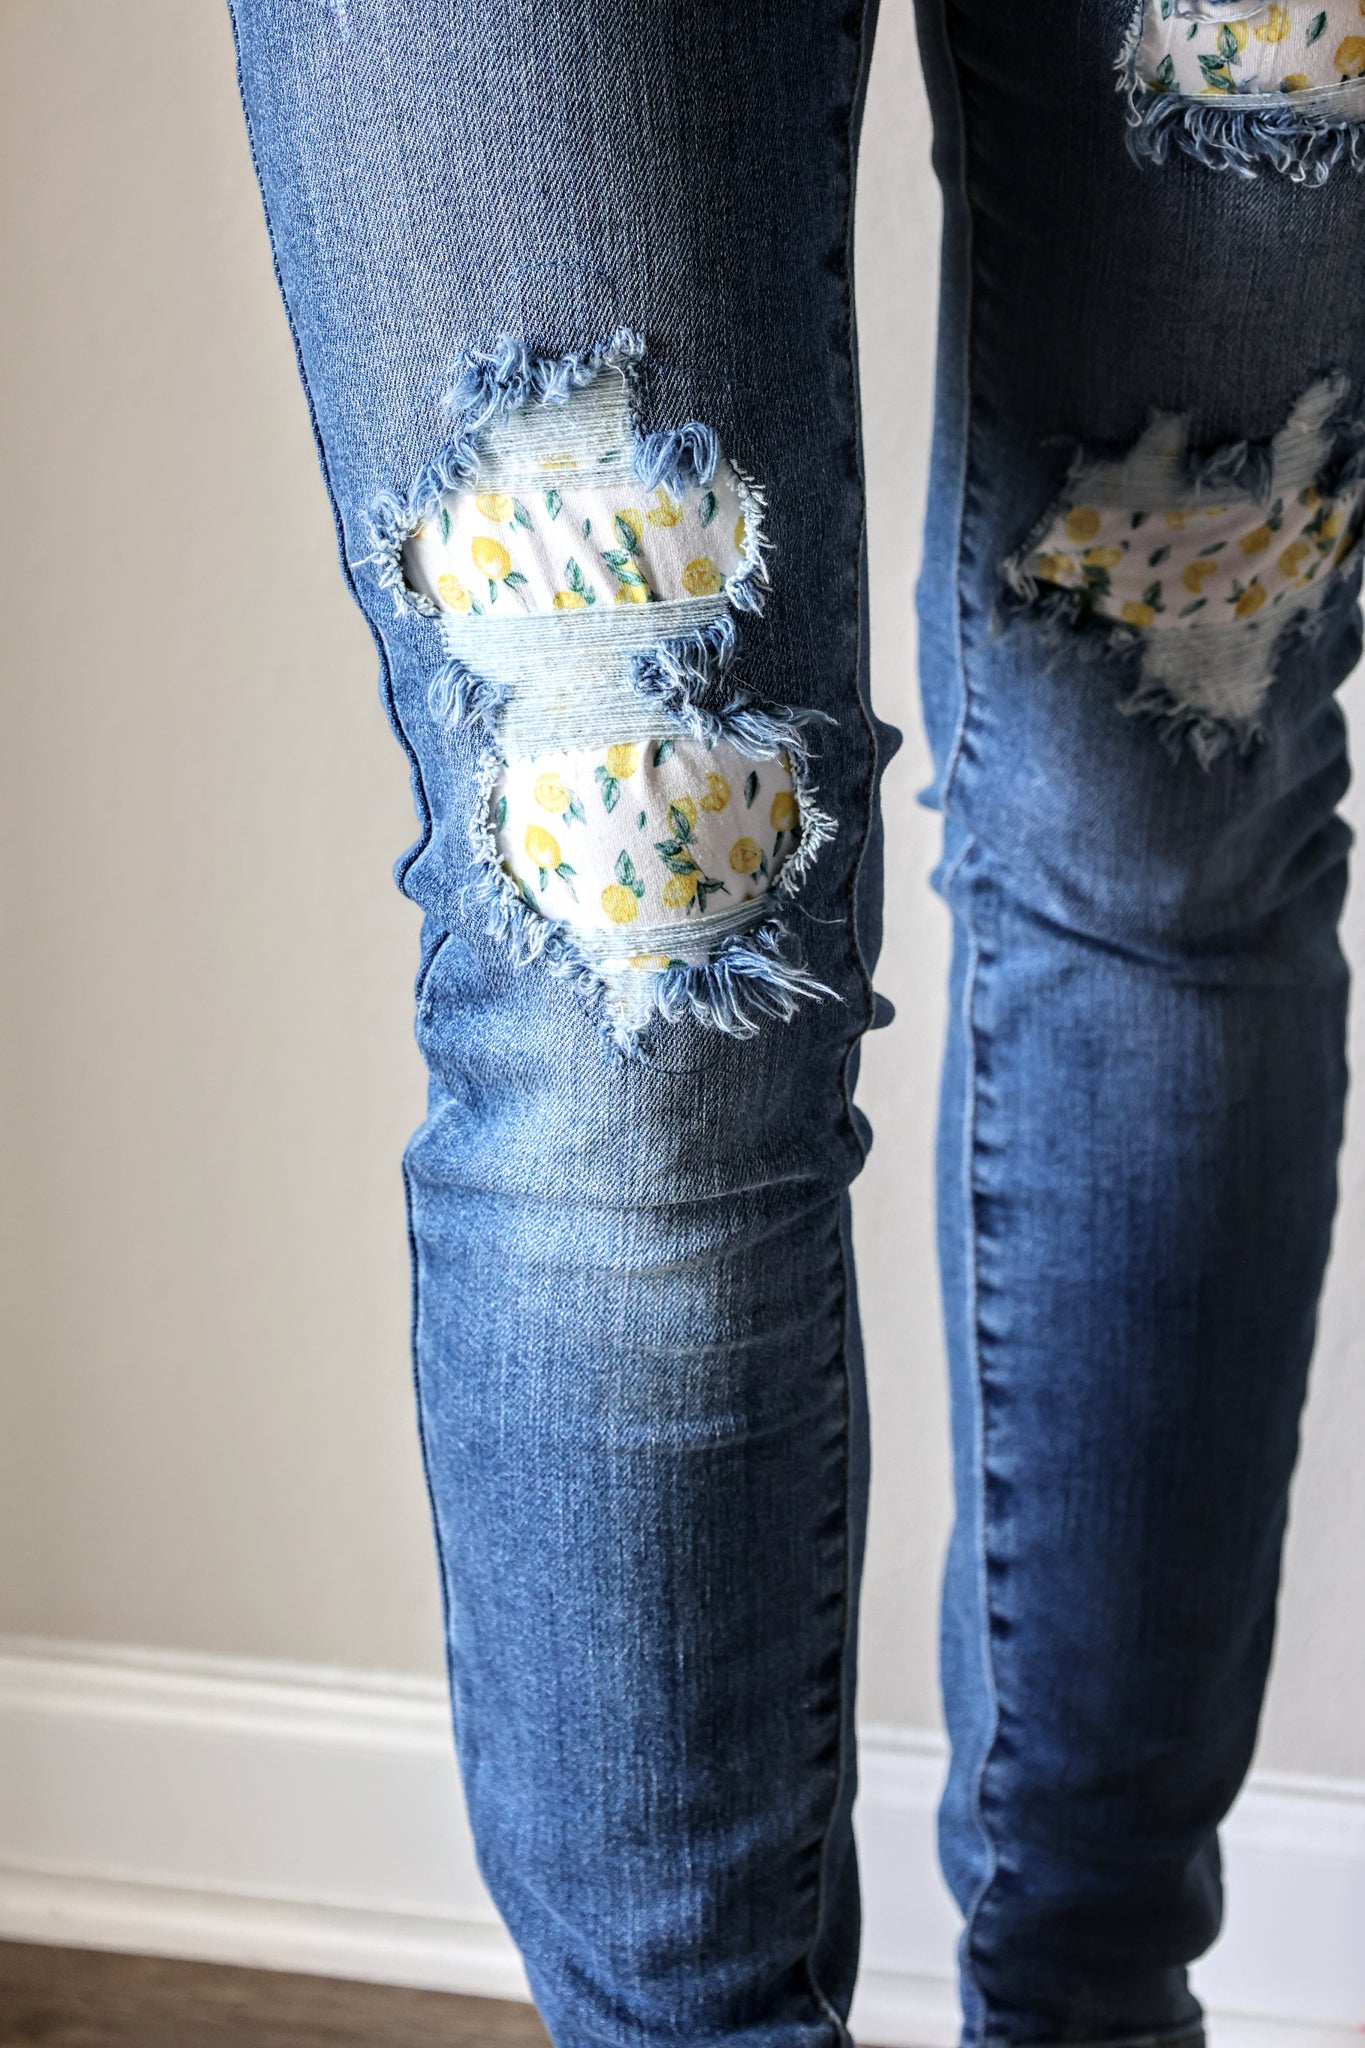 Patch Torn Jeans with Lace